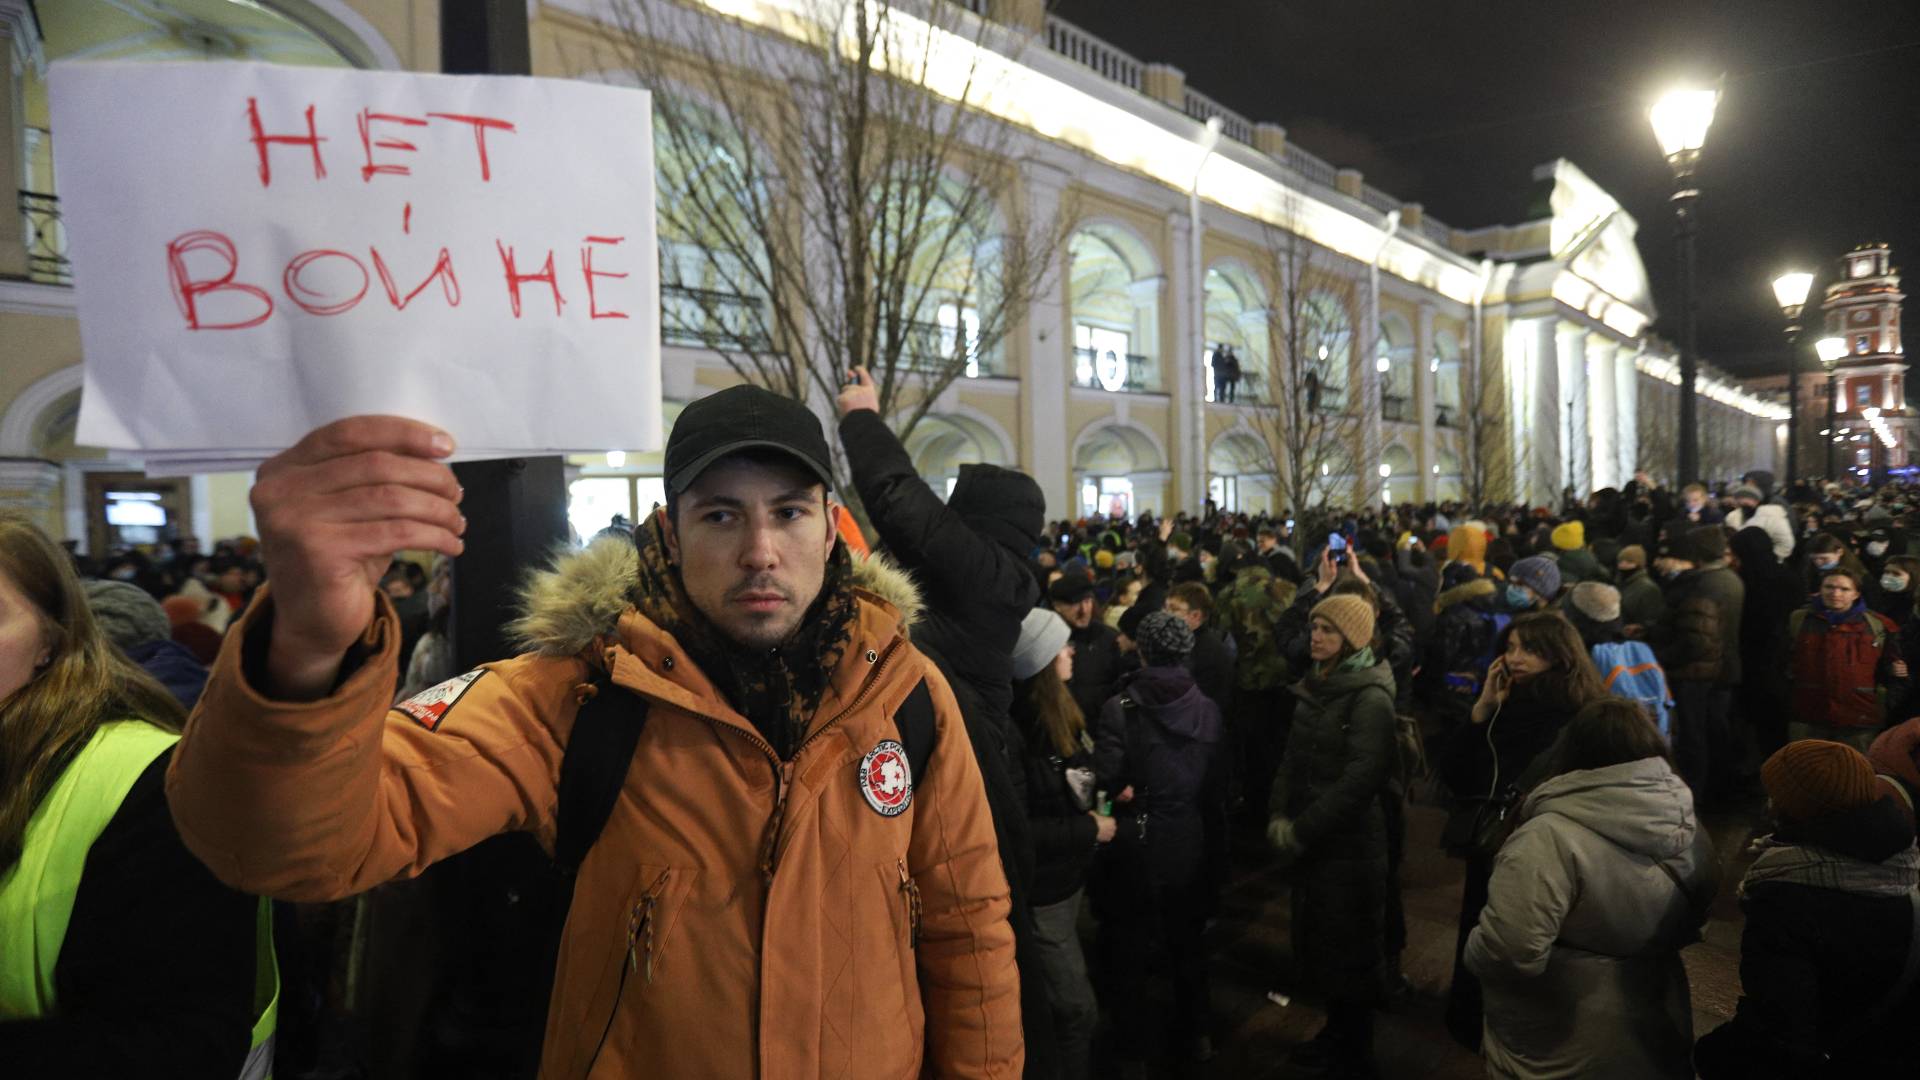 A demonstrator holding a placard reading "No to war" protests against Russia's invasion of Ukraine in central Saint Petersburg on February 24, 2022.